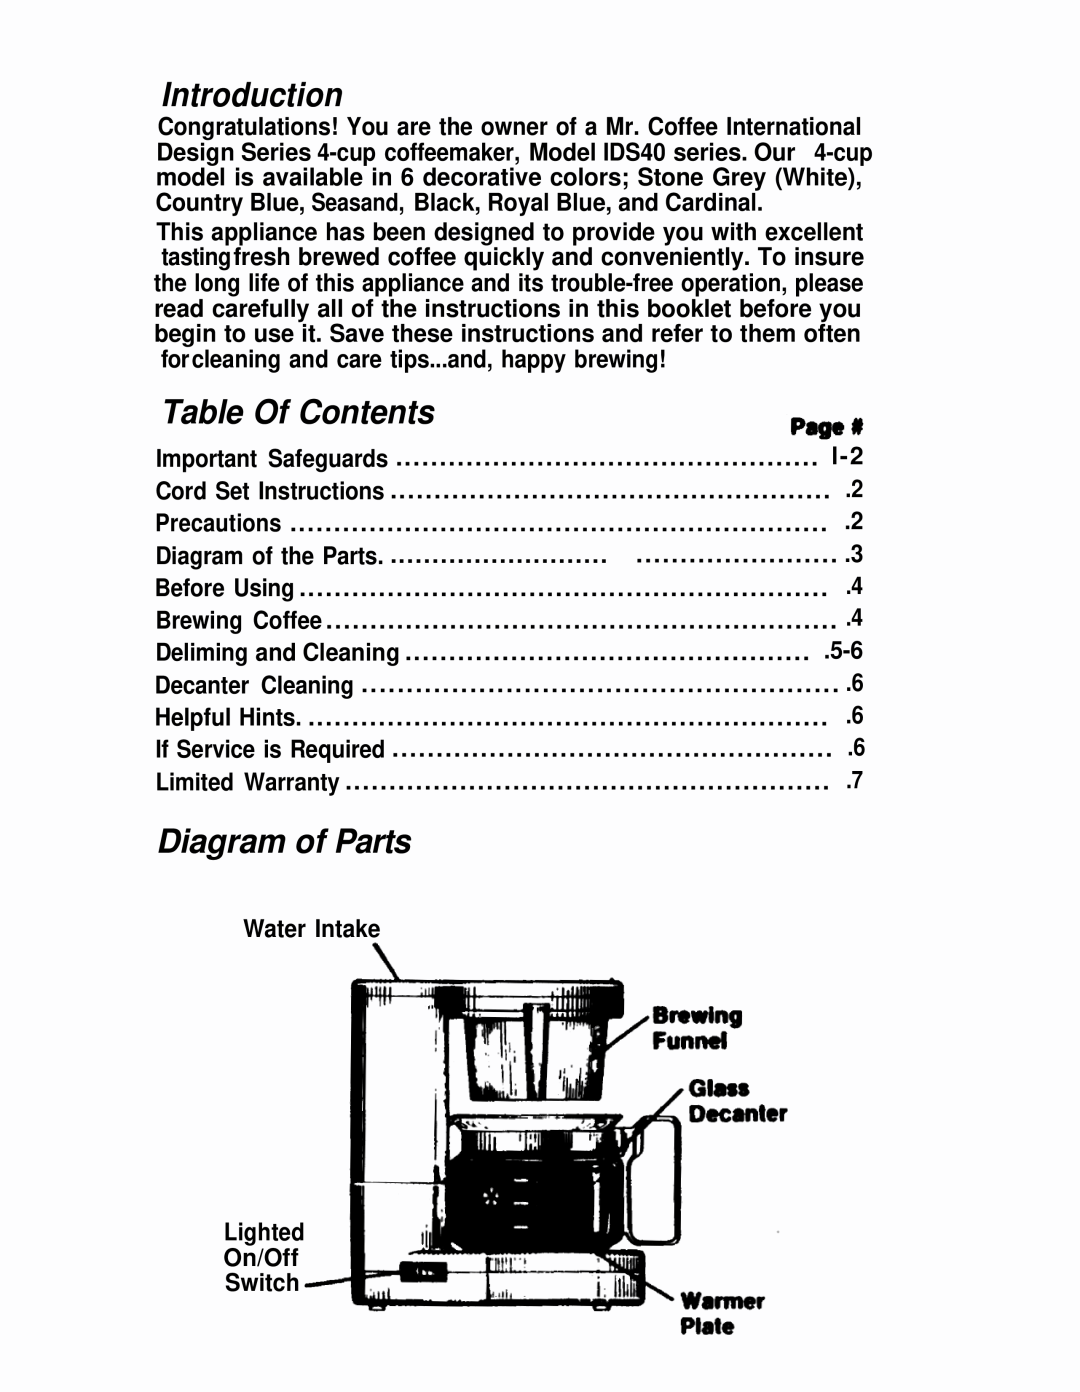 Mr. Coffee IDS40 manual Introduction, Table Of Contents, Diagram of Parts 